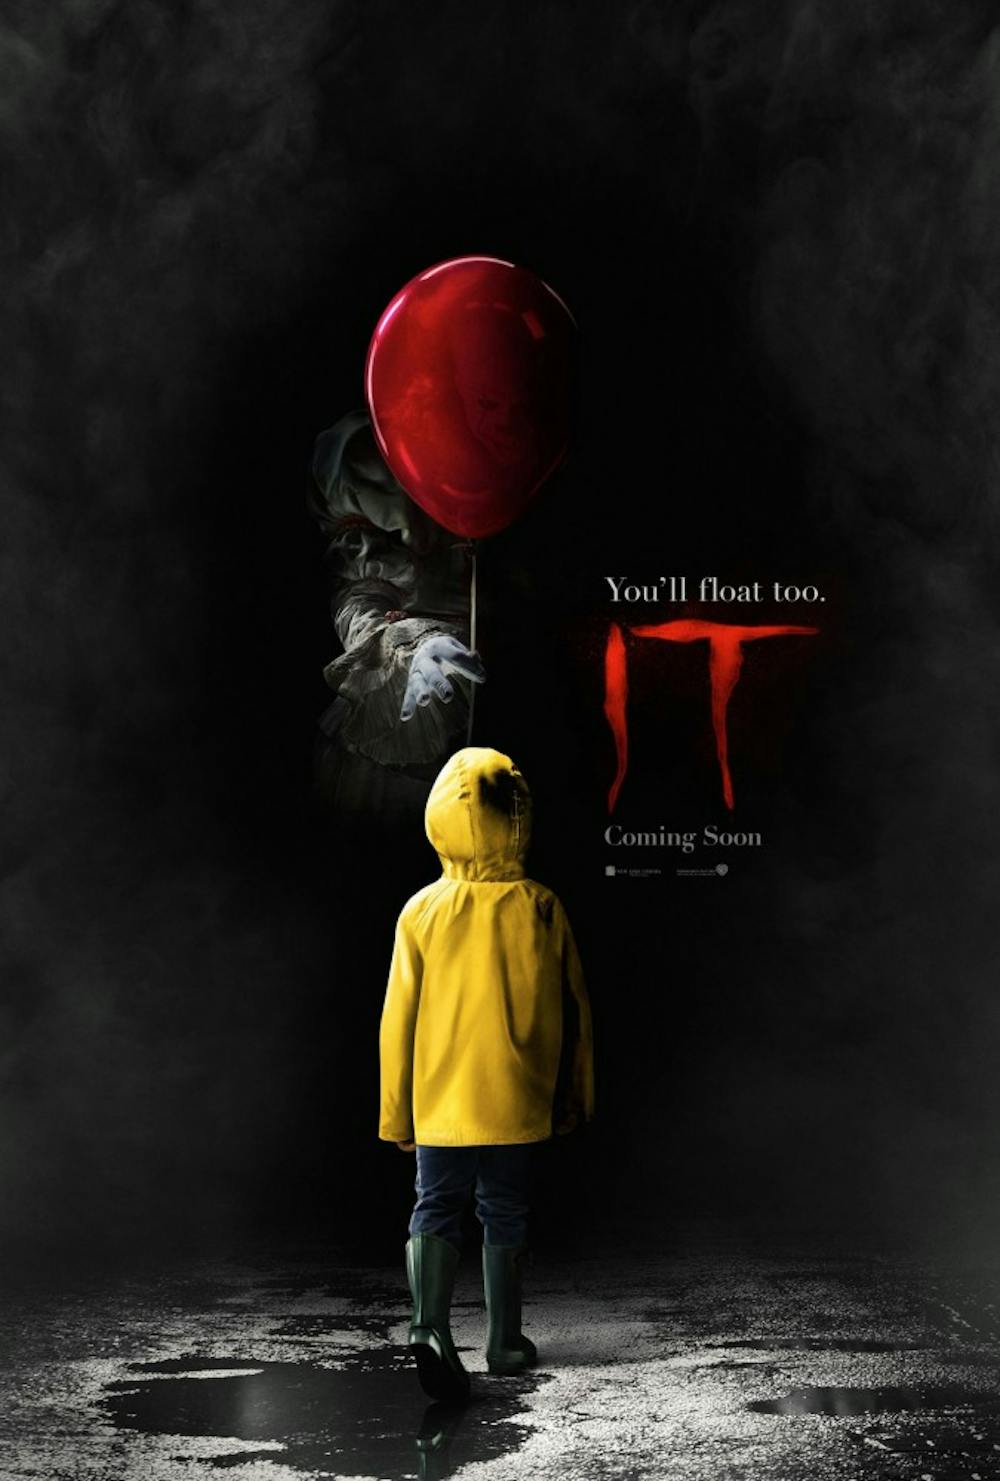 The remake of Stephen King horror classic "It" retains both the horror and the heart of the source material.